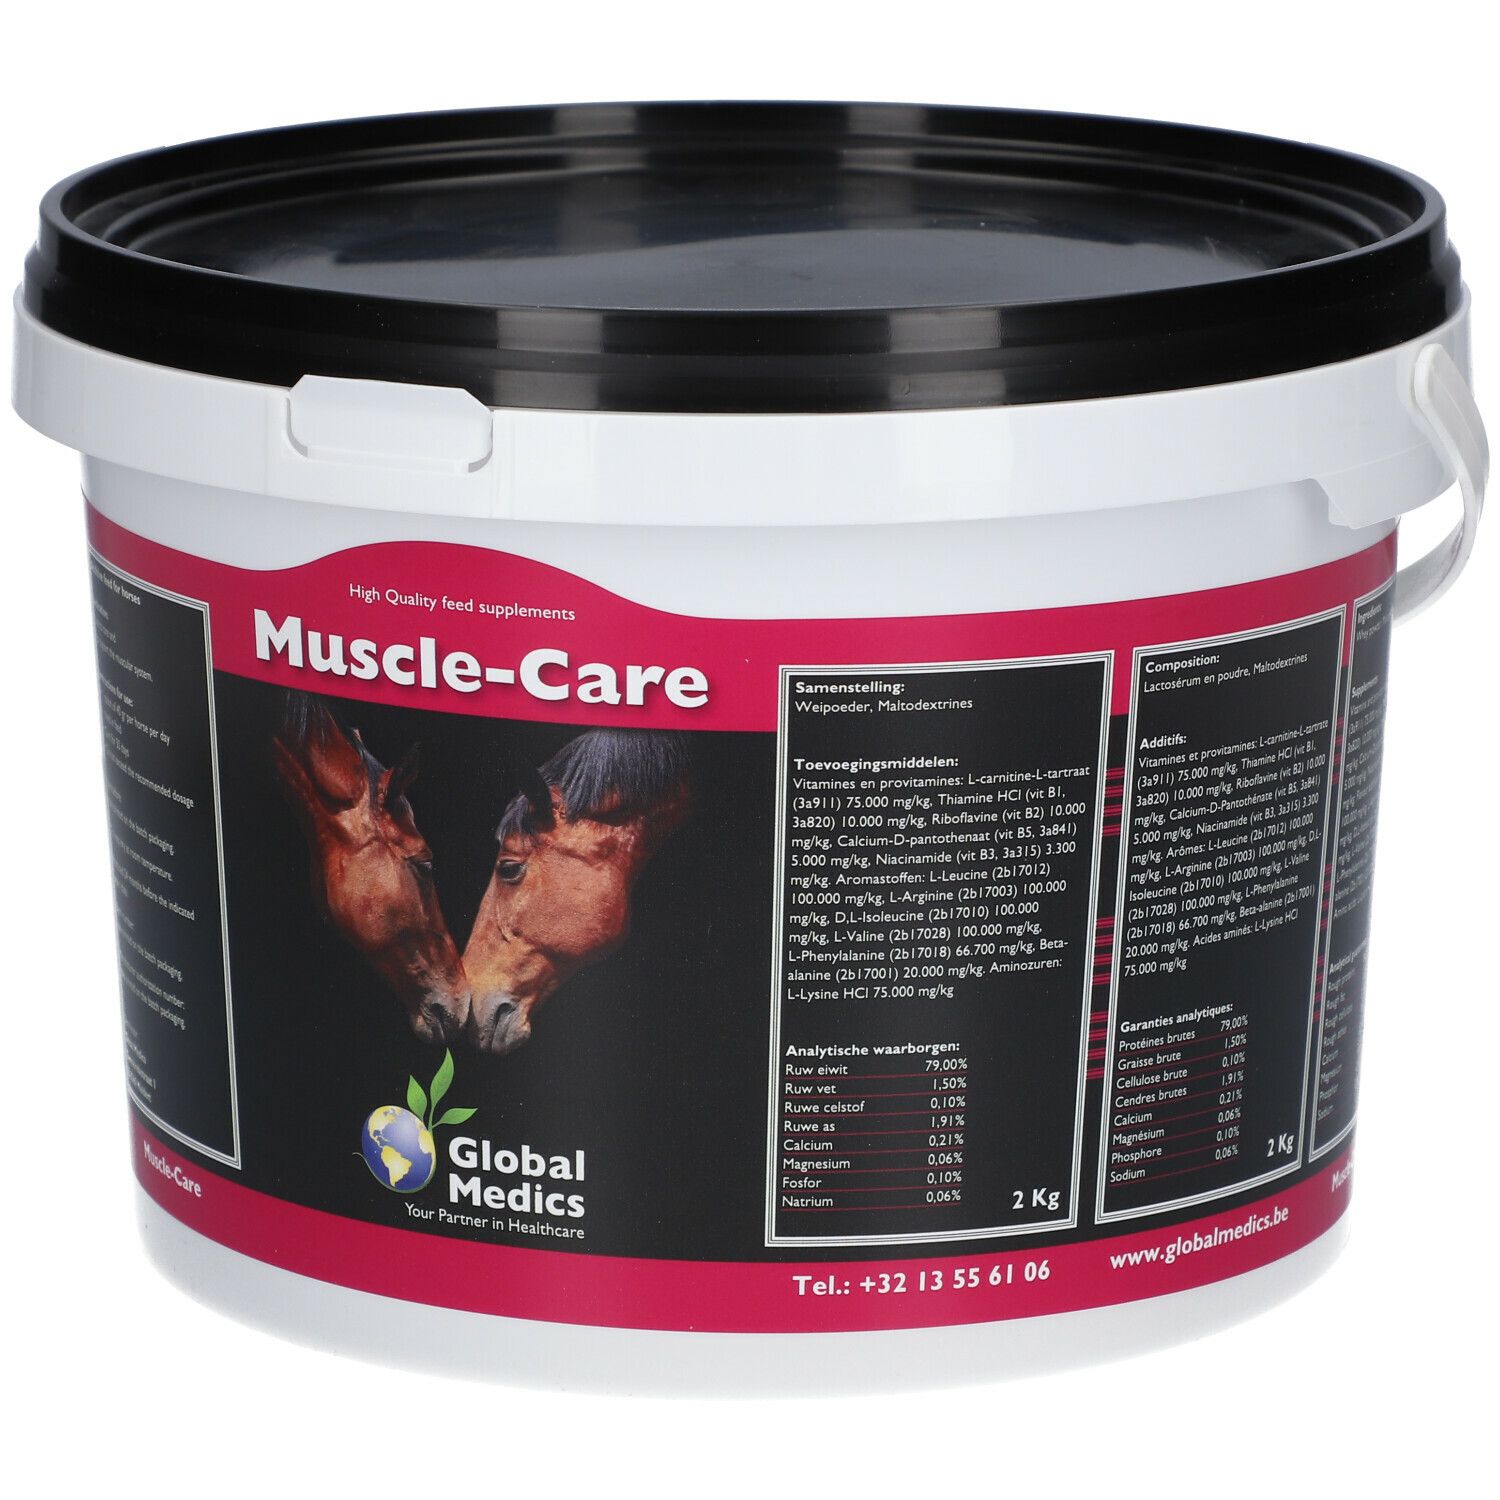 GLOBAL MEDICS Muscle-Care Poudre